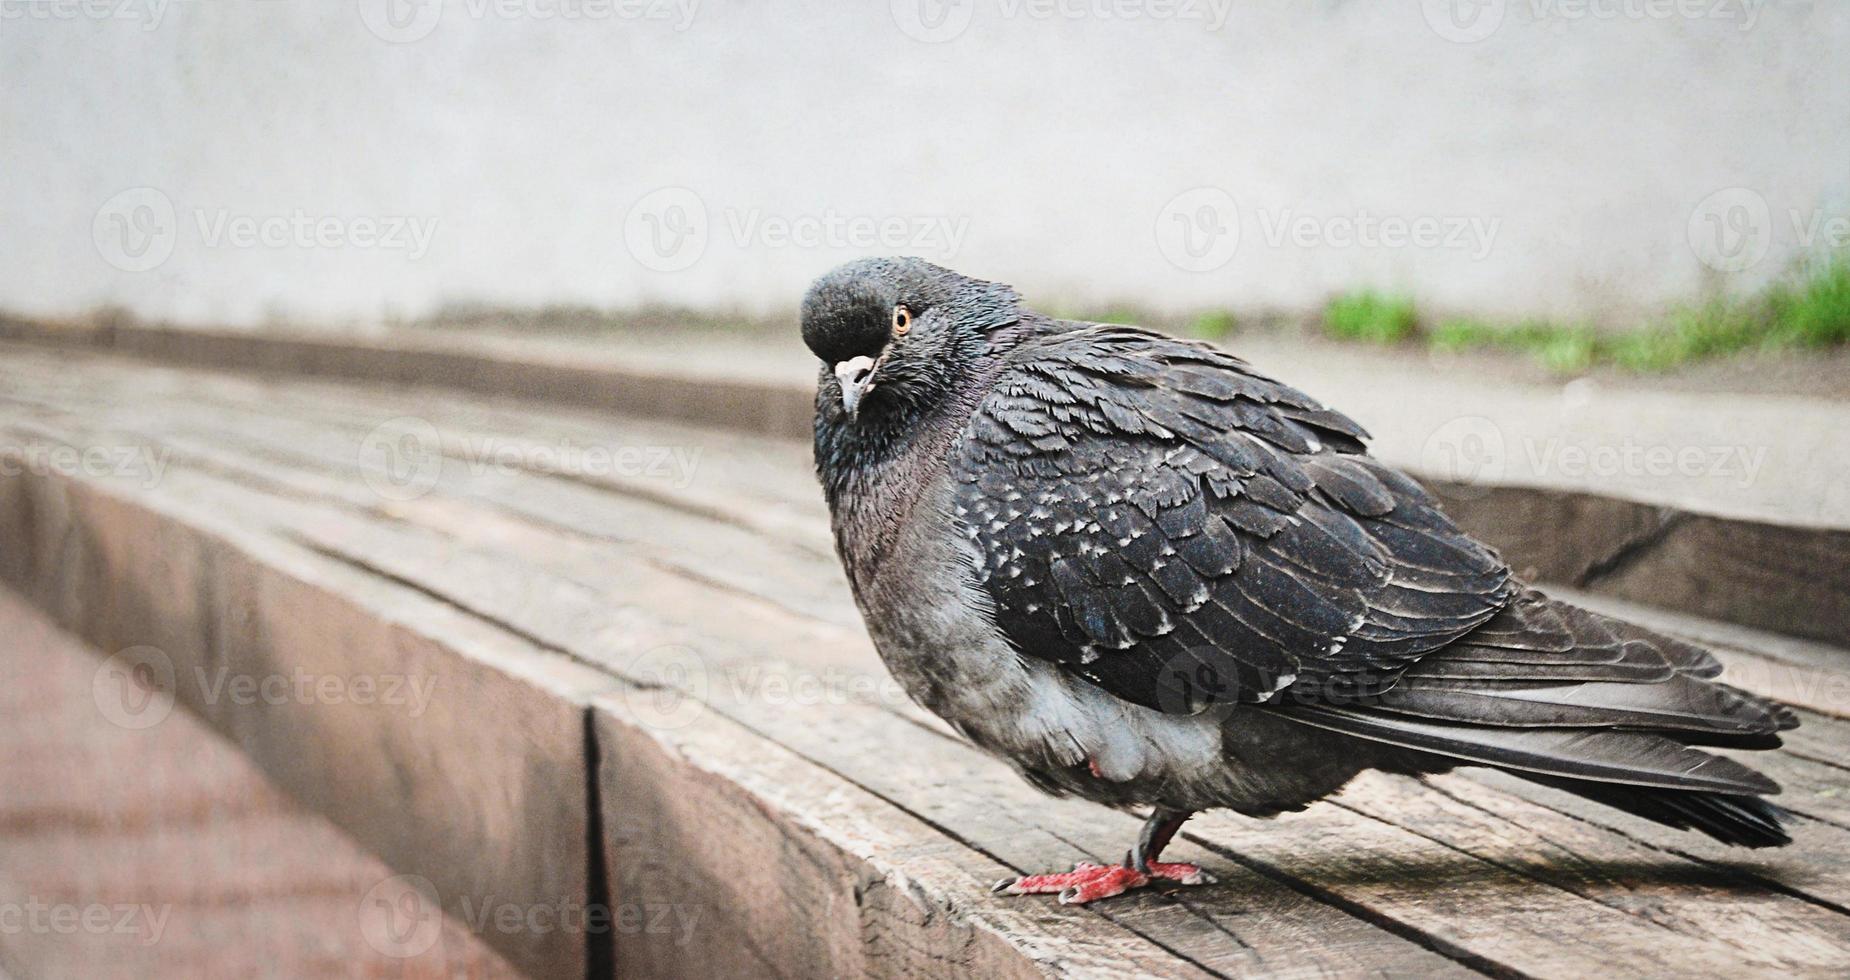 Population of pigeons in cities is growing. photo